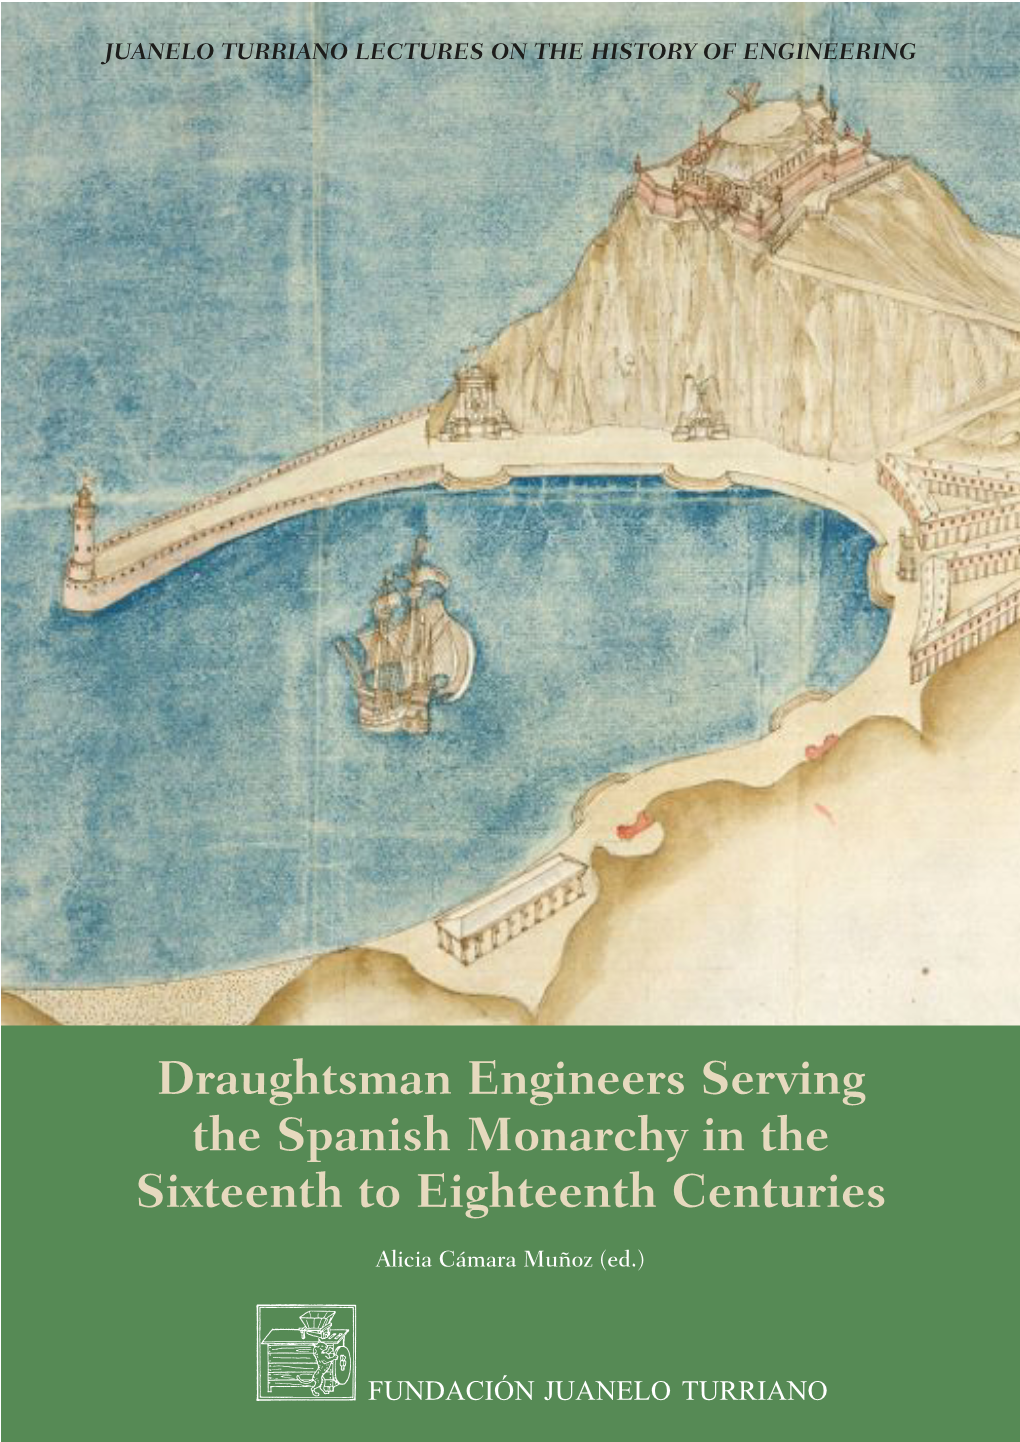 Draughtsman Engineers Serving the Spanish Monarchy in the Sixteenth to Eighteenth Centuries